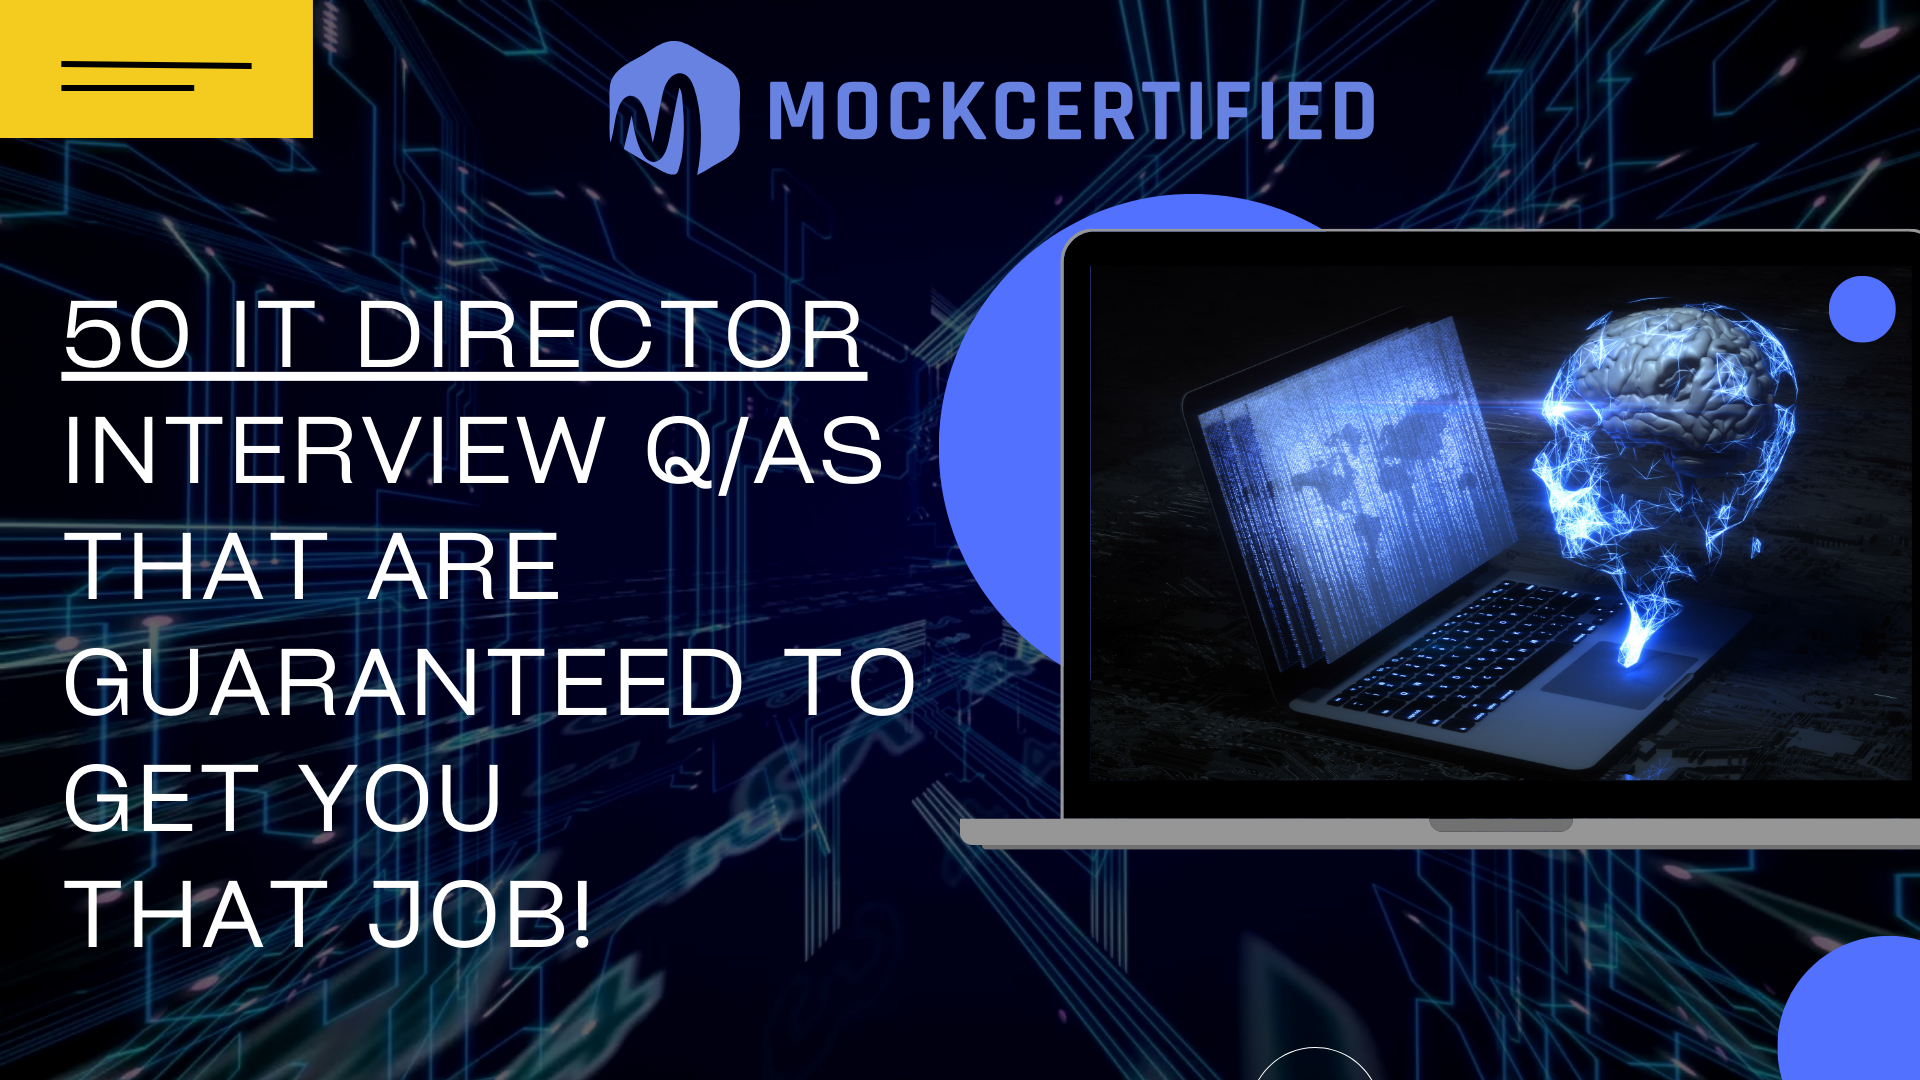 50 IT Director Interview Q/aS THAT ARE GUARANTEED TO GET YOU THAT JOB!